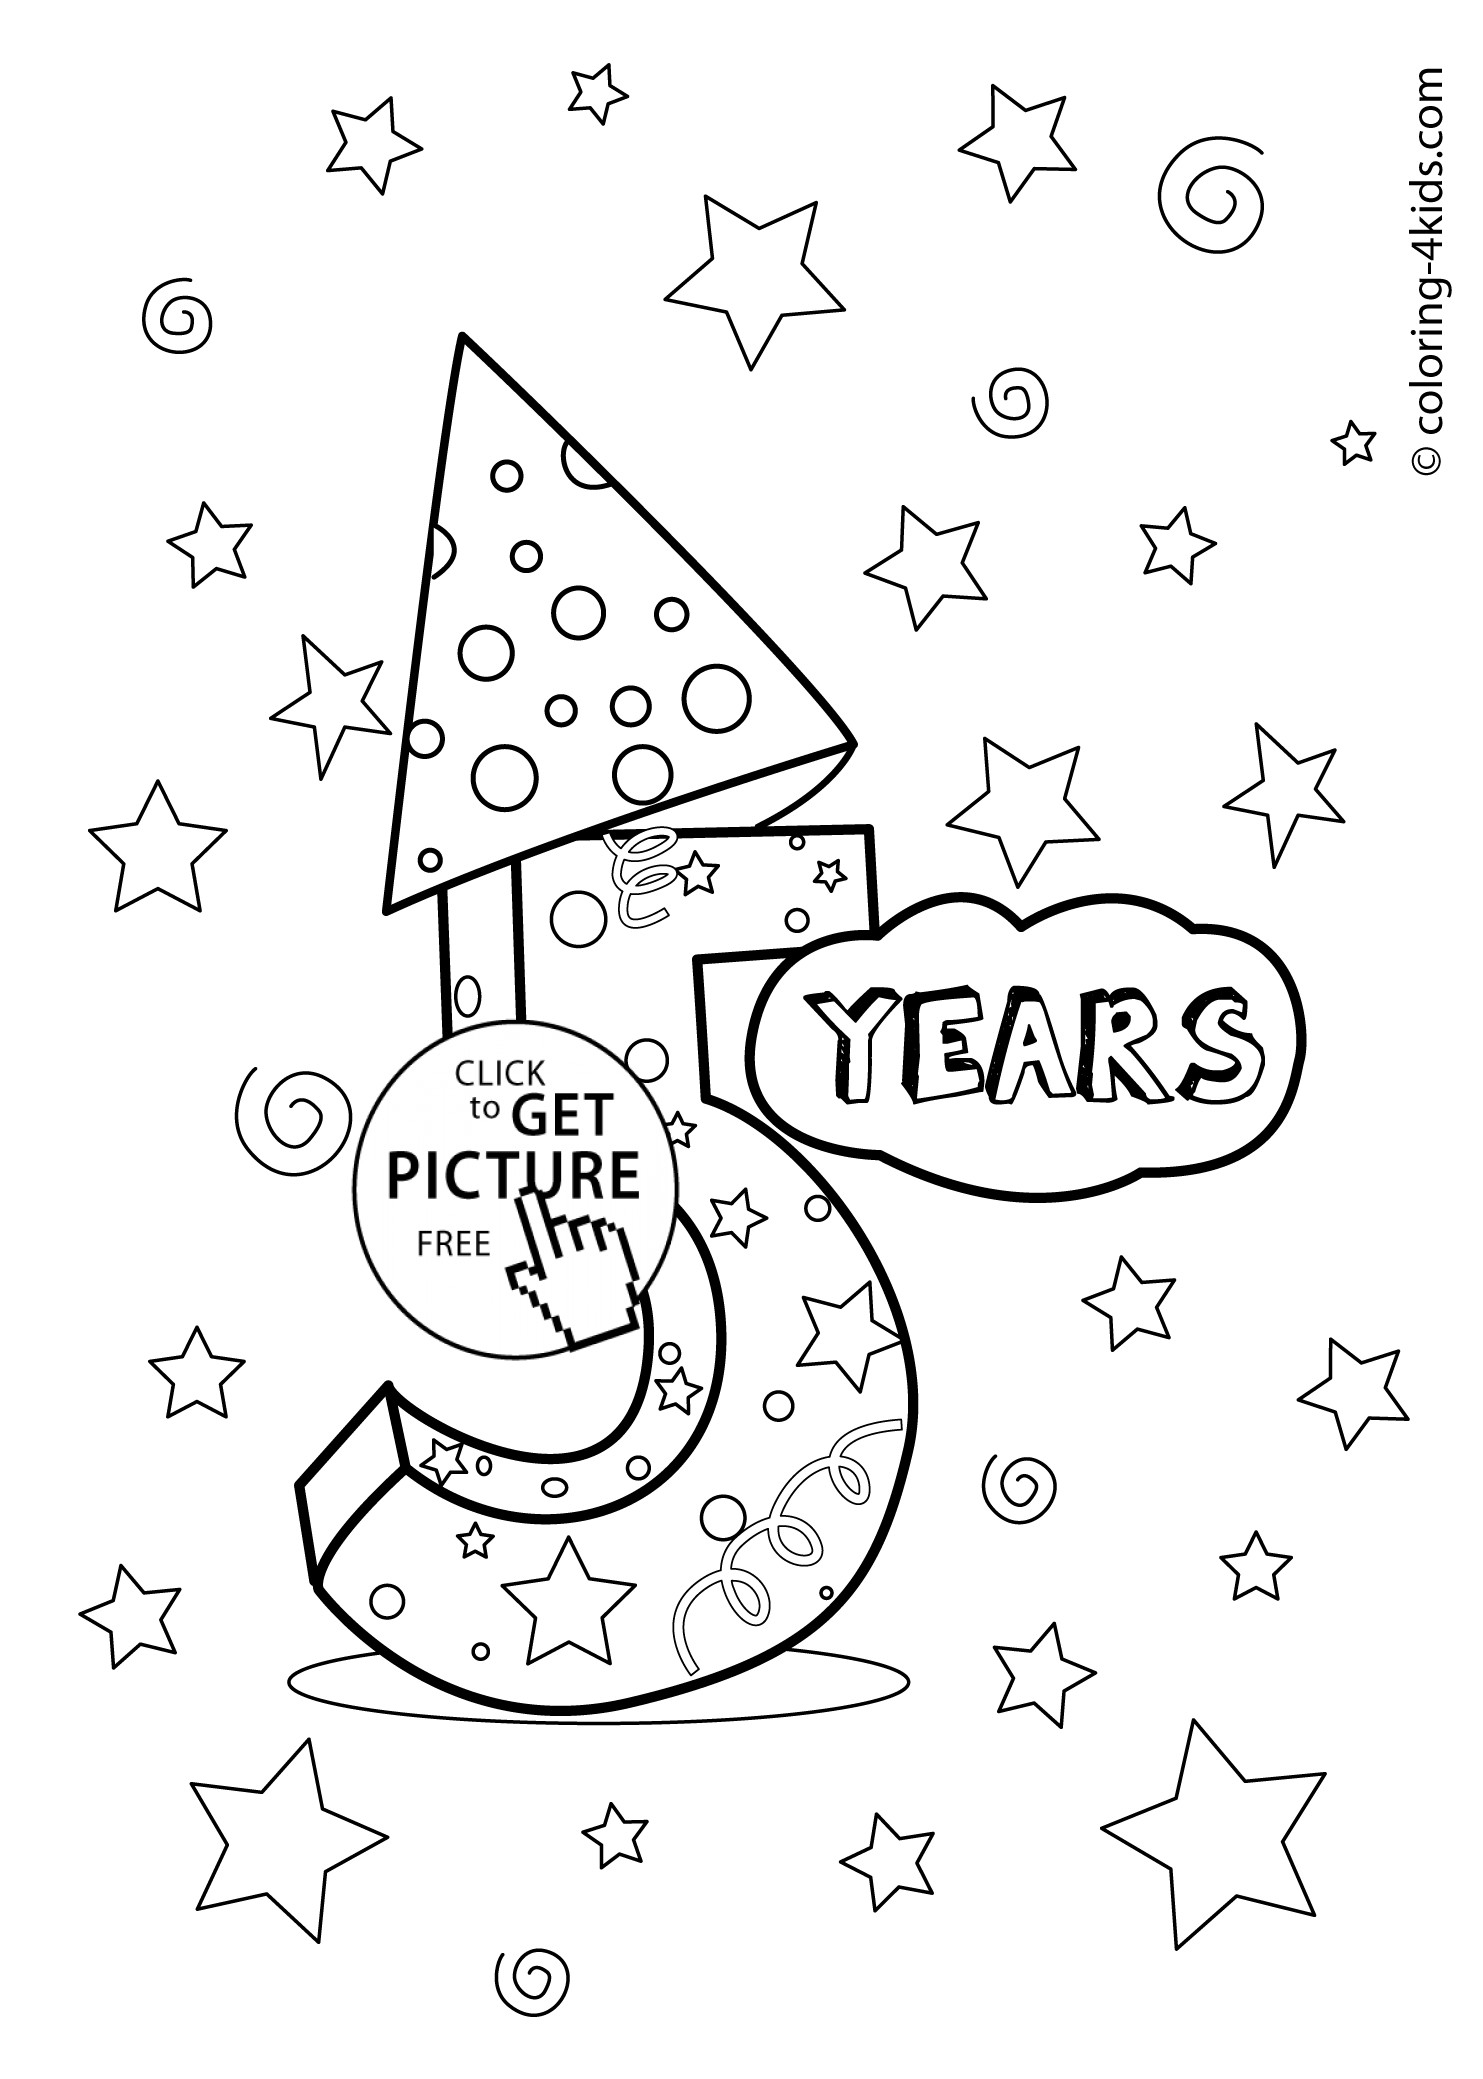 Coloring Sheets For Girls The Birthday Boy
 5 years birthday coloring pages for kids printables